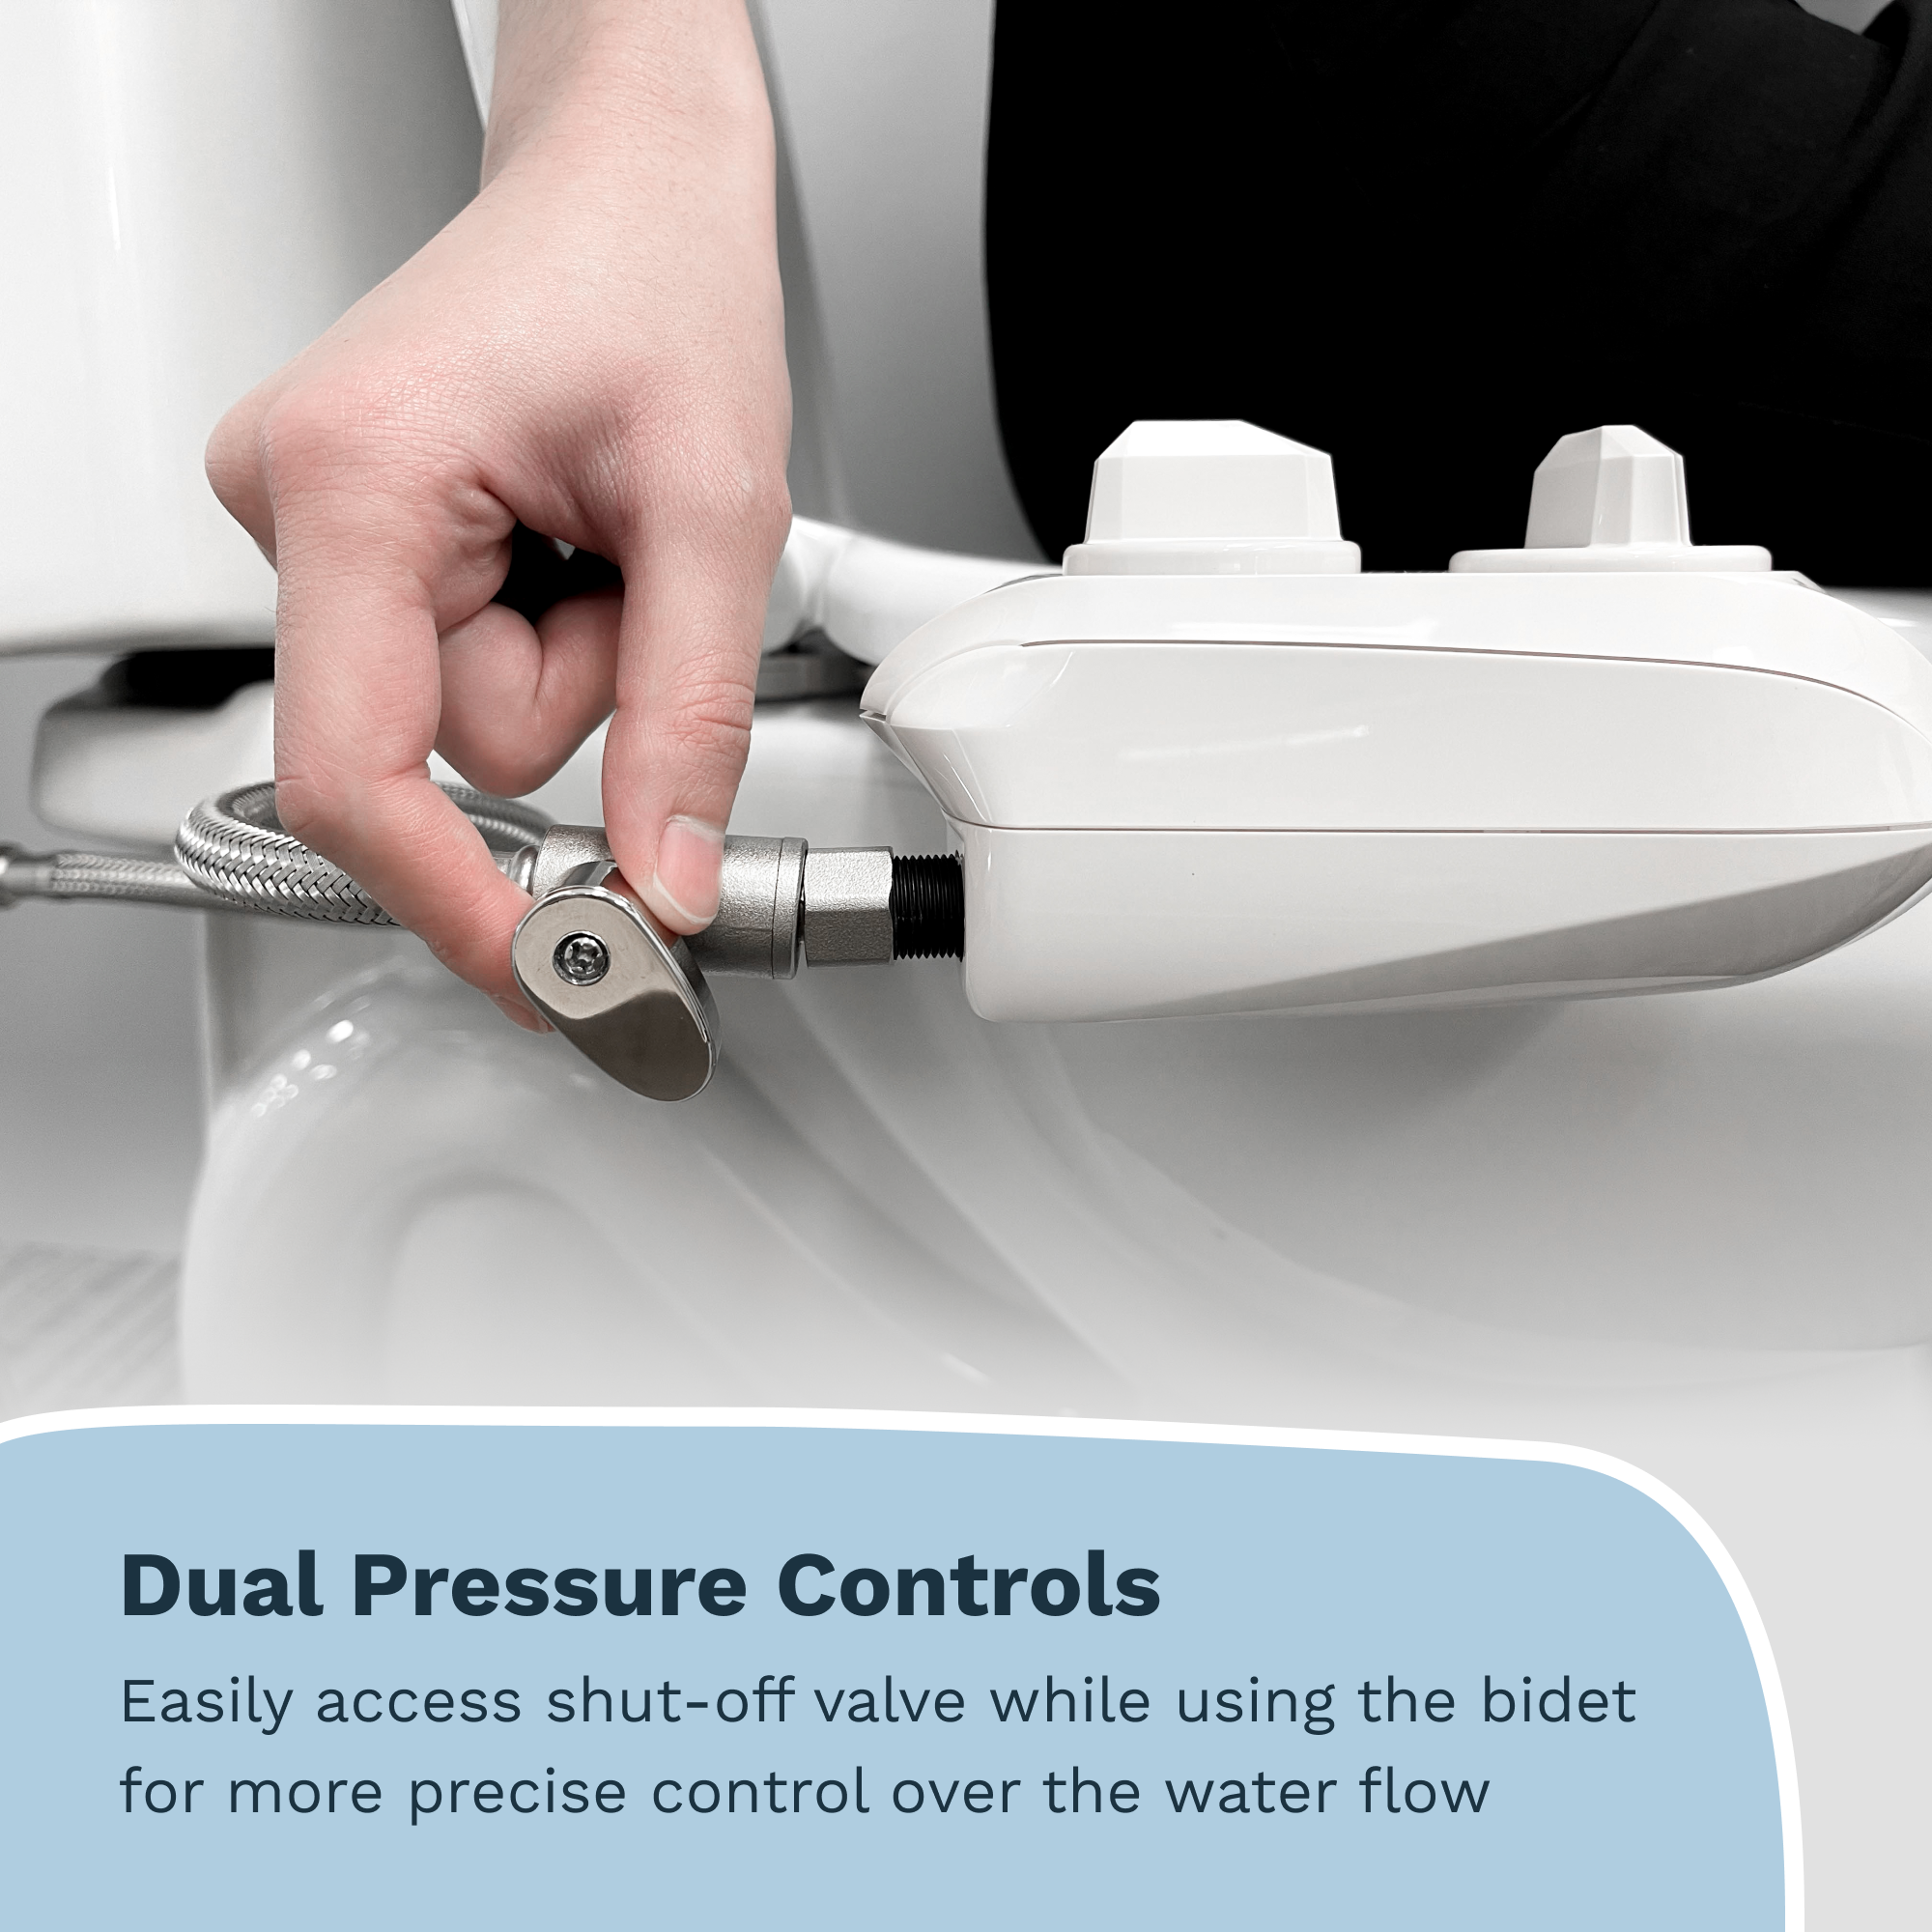 Easily adjust the water flow on the Cold Water Shut-Off Hose while sitting on the toilet